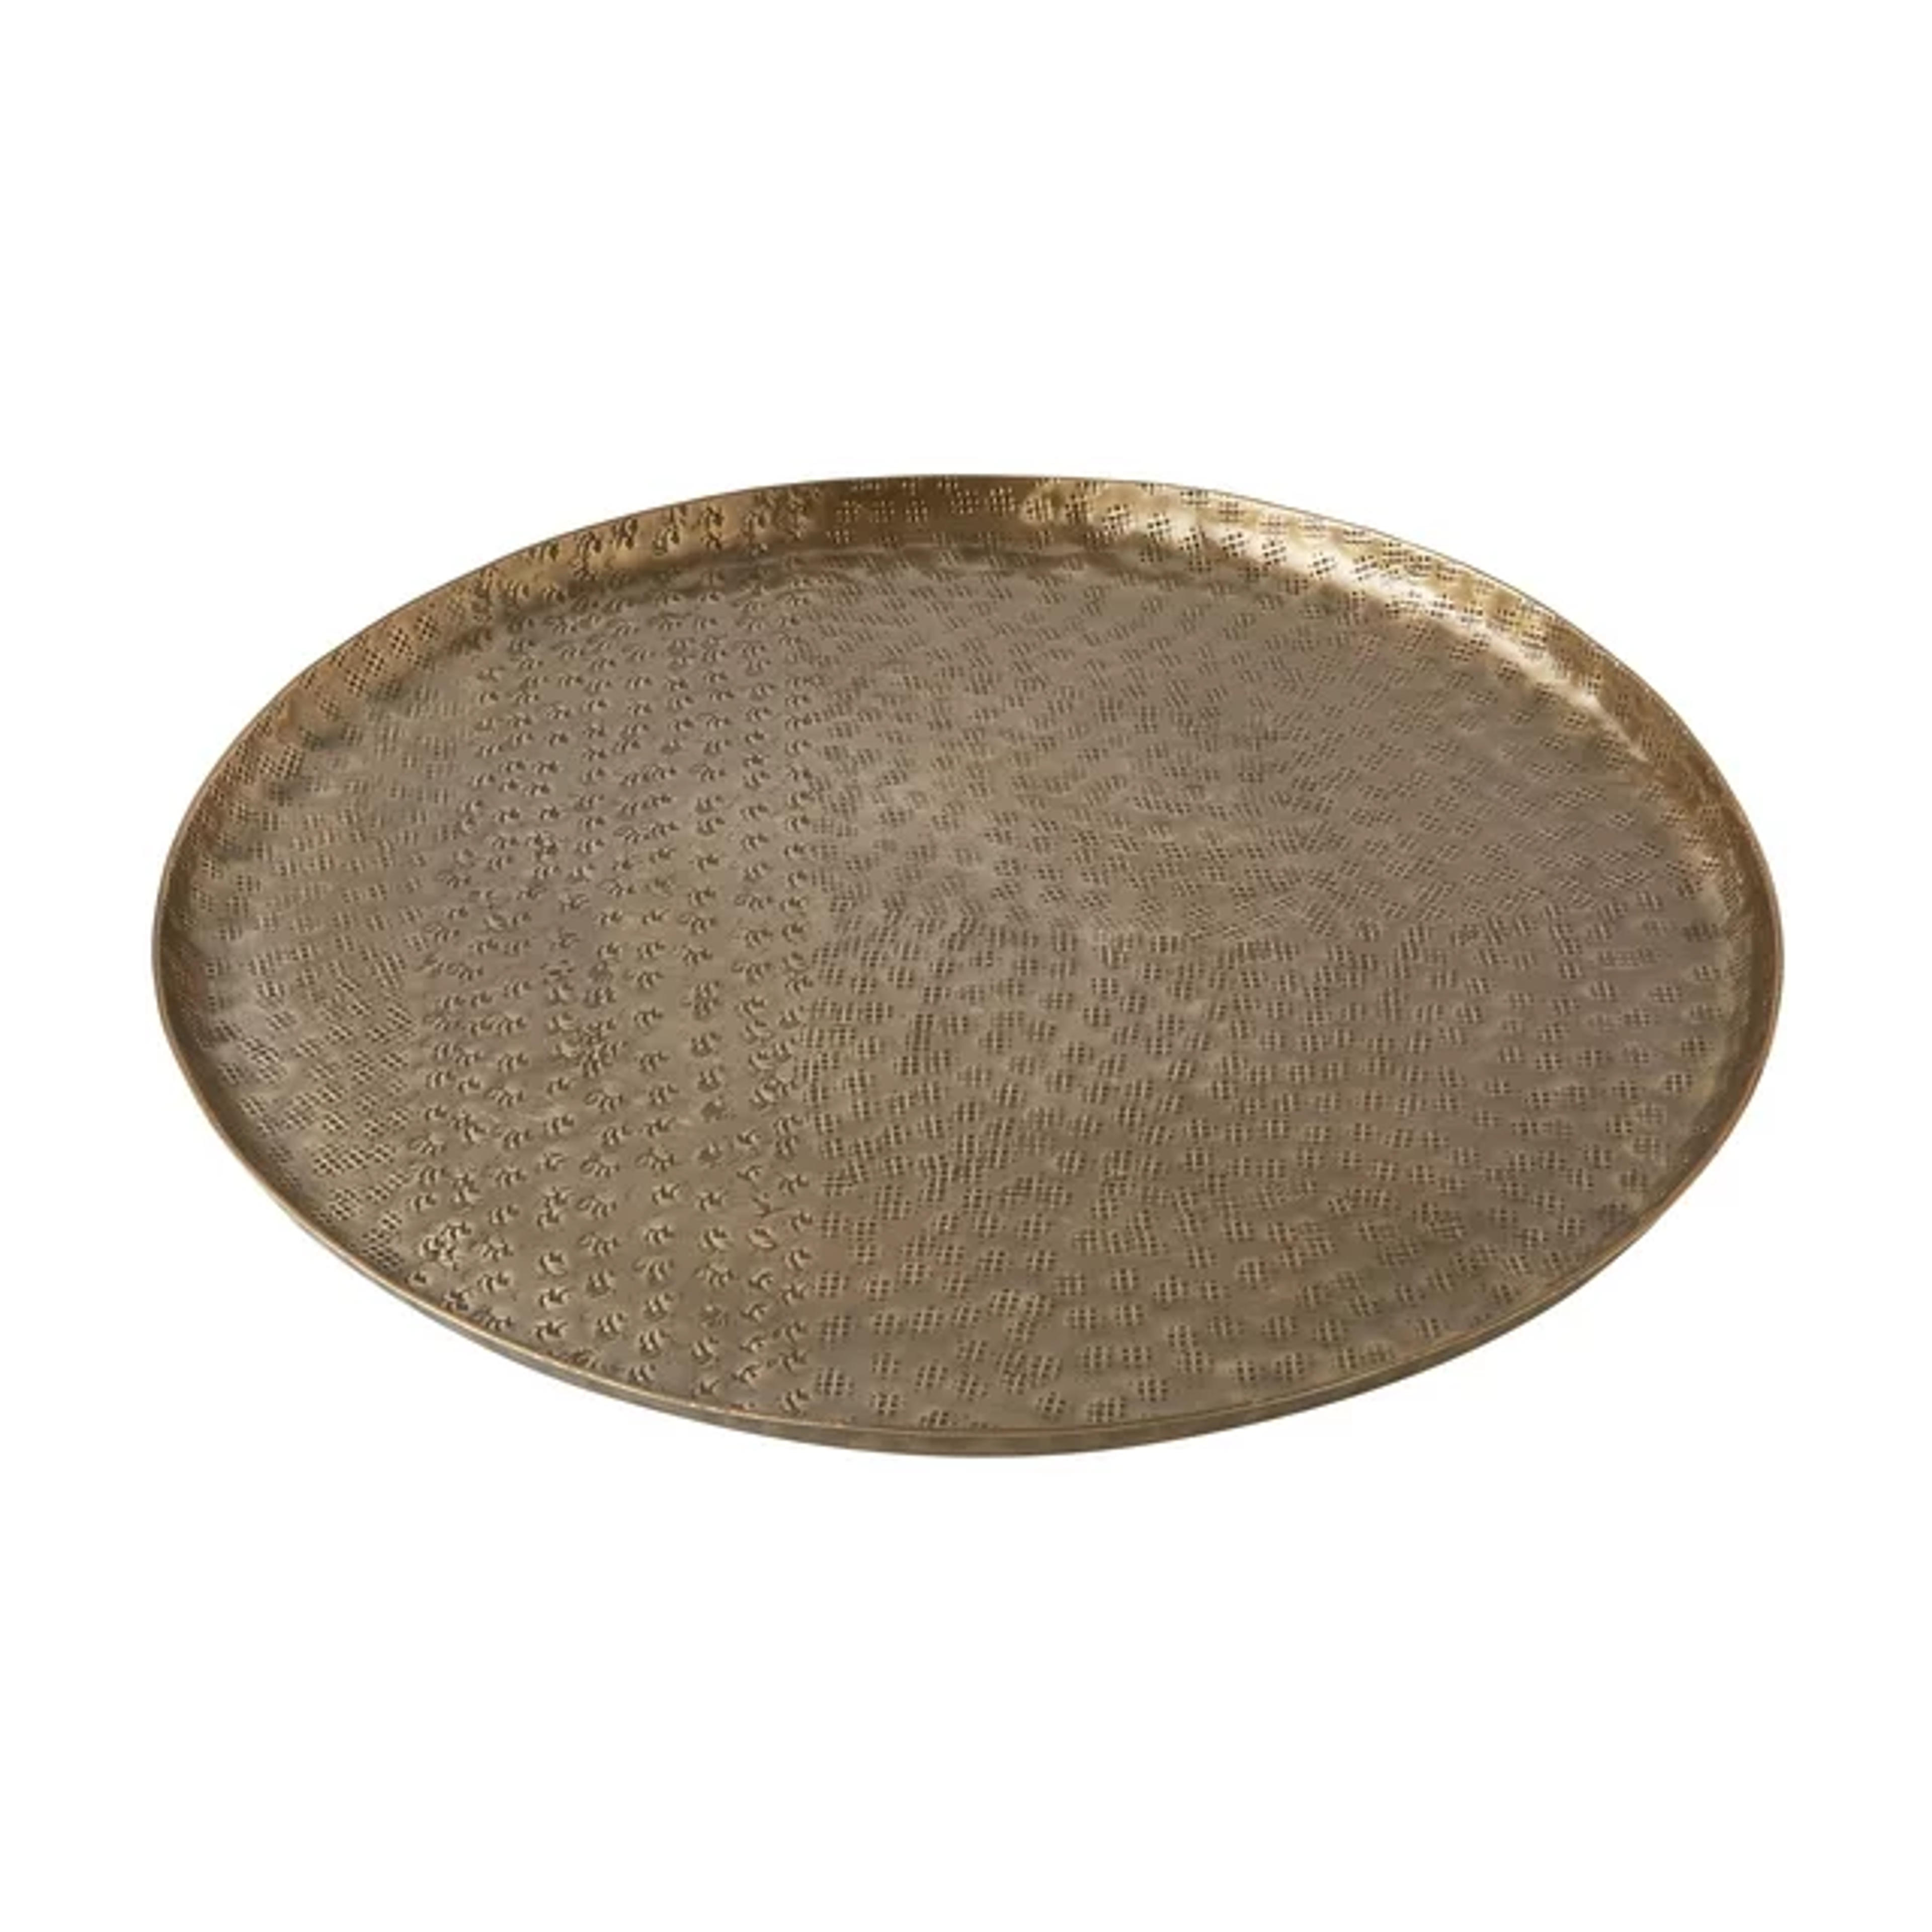 Better Homes & Gardens Medium 14" Round Antique Brass Hammered Metal Tray by Dave & Jenny Marrs - Walmart.com